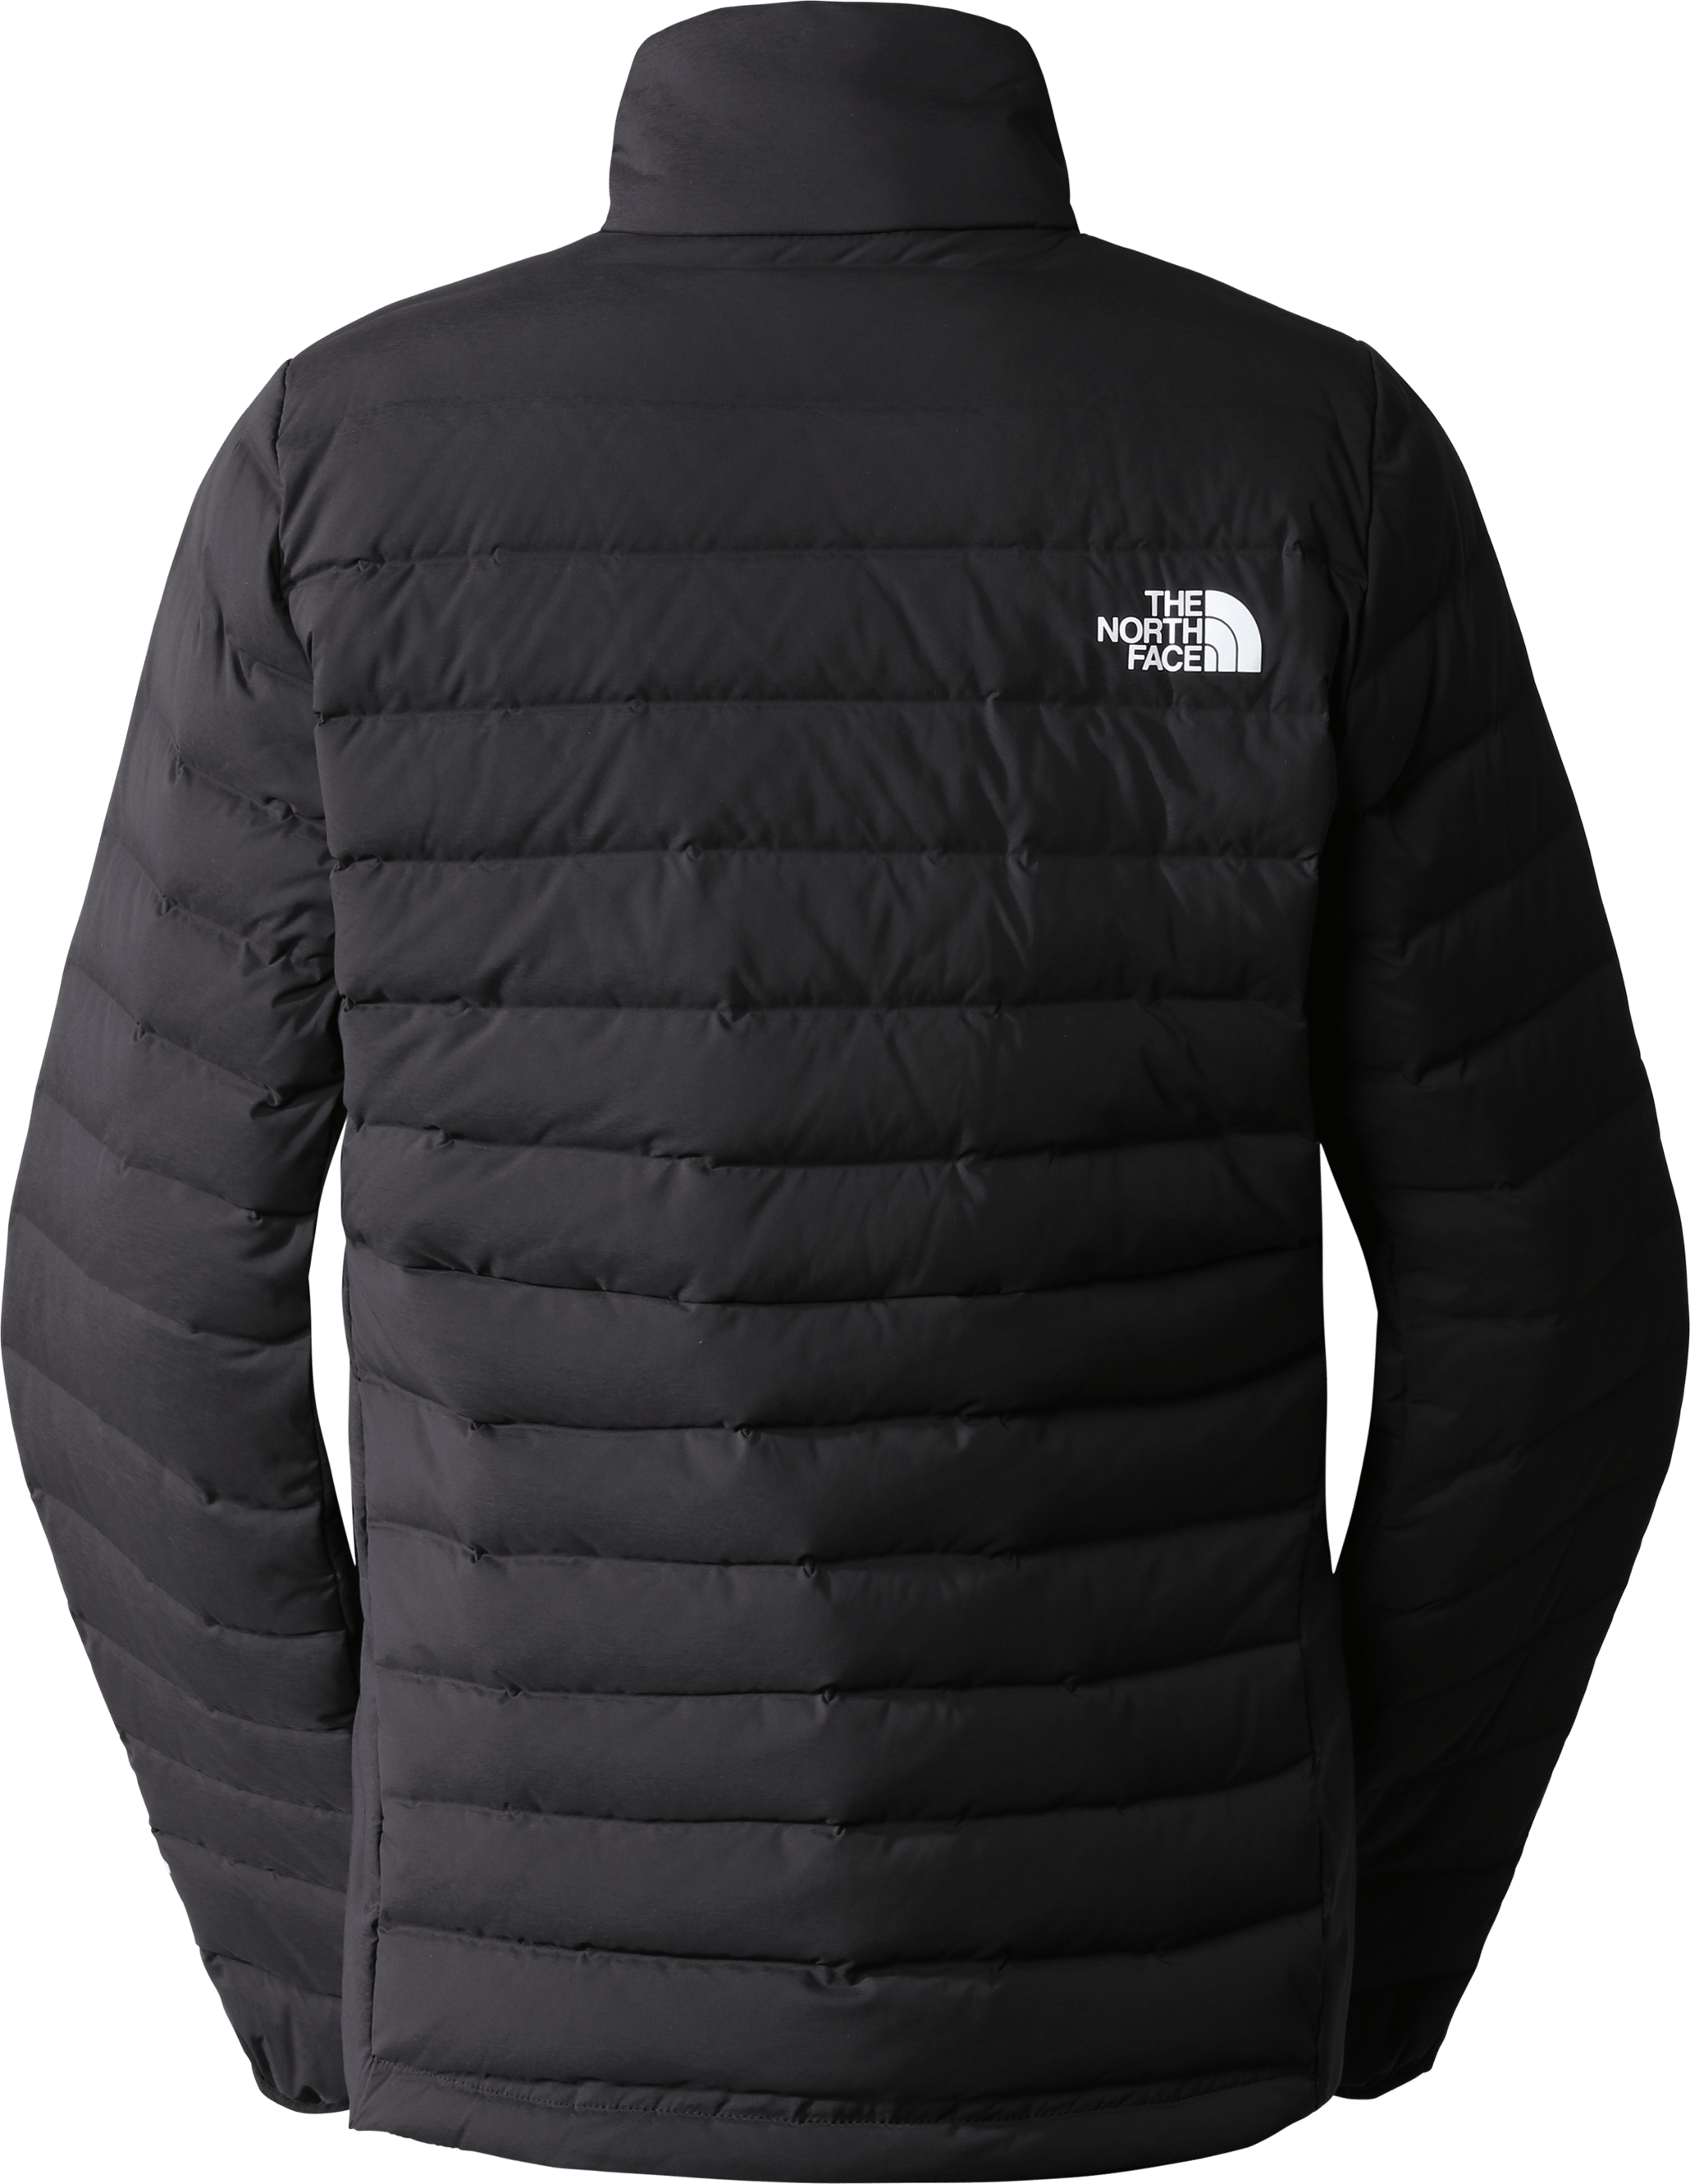 here | Jacket Belleview Buy Women\'s Jacket Women\'s Black TNF Outnorth Black | Belleview TNF Down Down Stretch Stretch